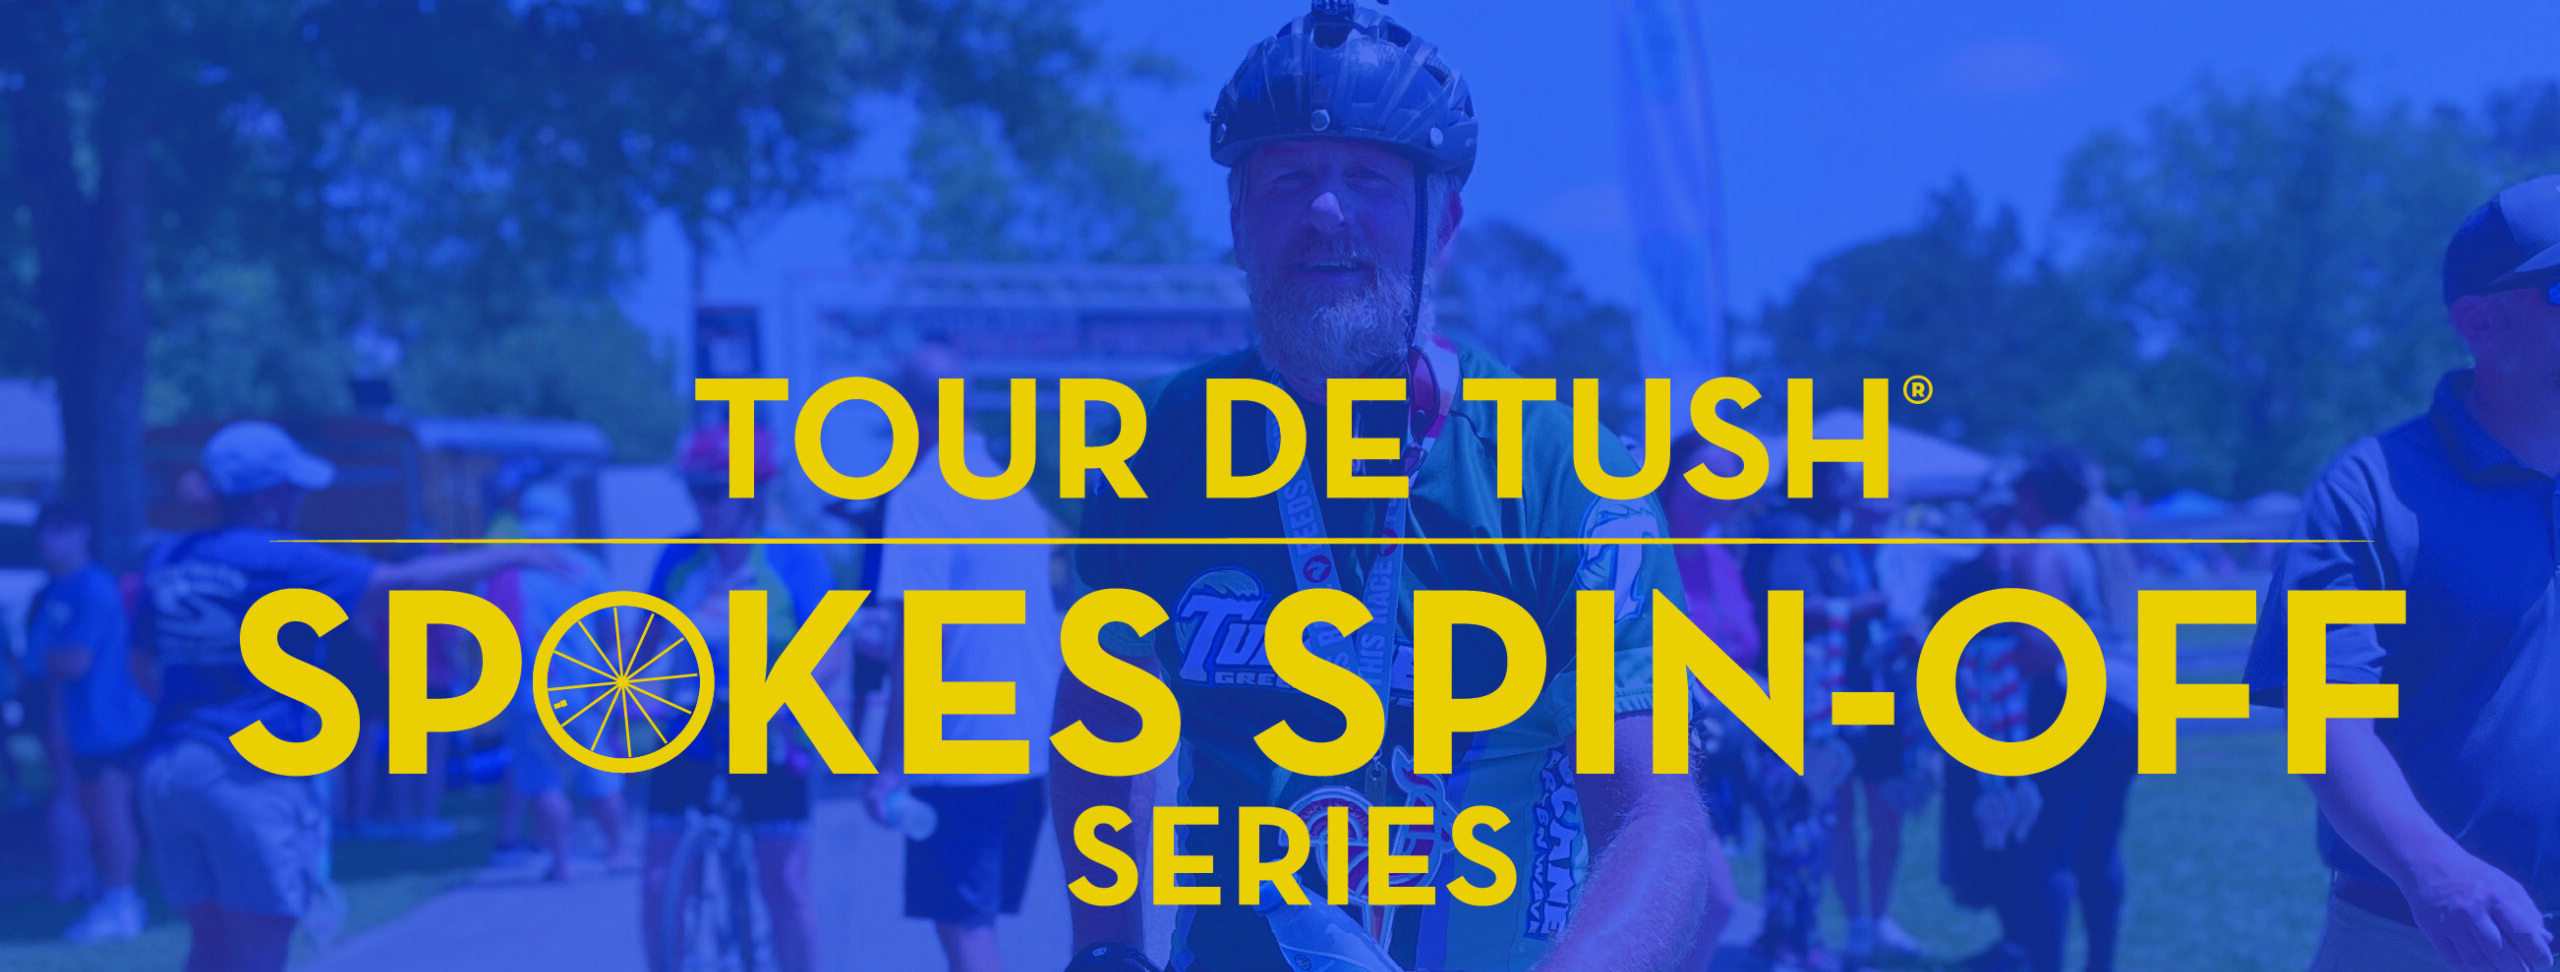 About Tour de Tush & The New Spokes Spin-Off Series